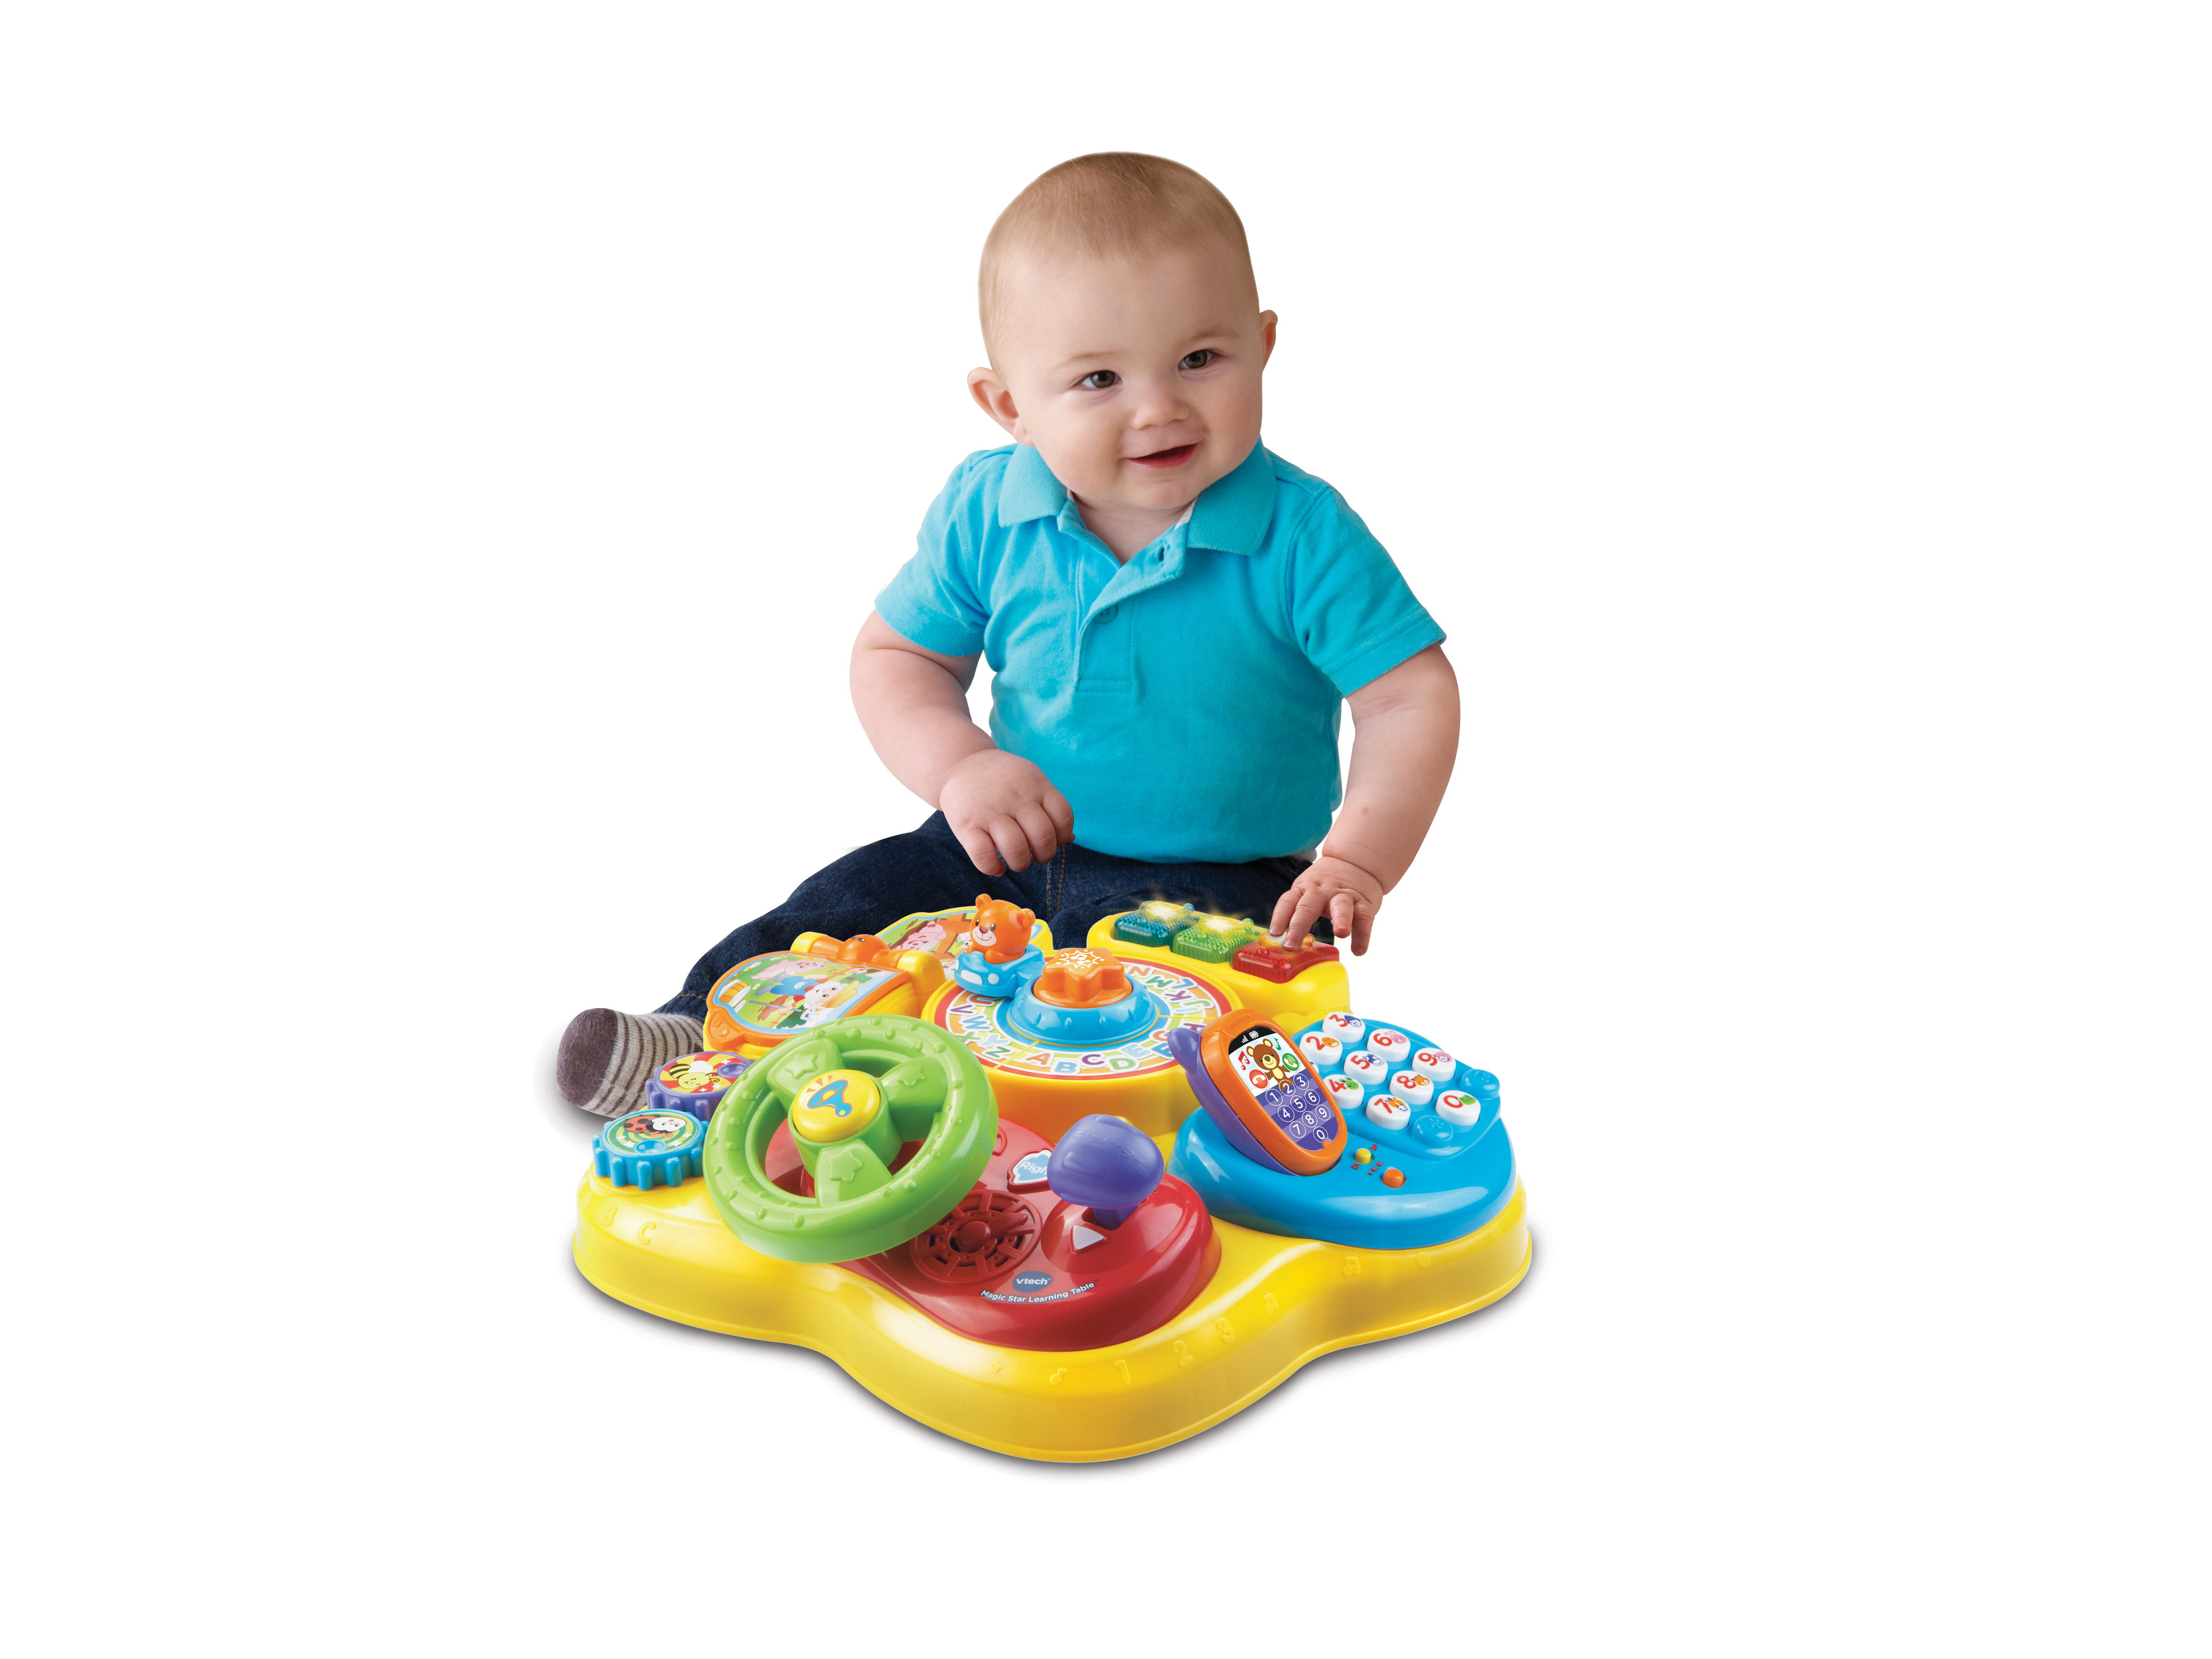 Magic Star Learning Table VTech - image 5 of 11